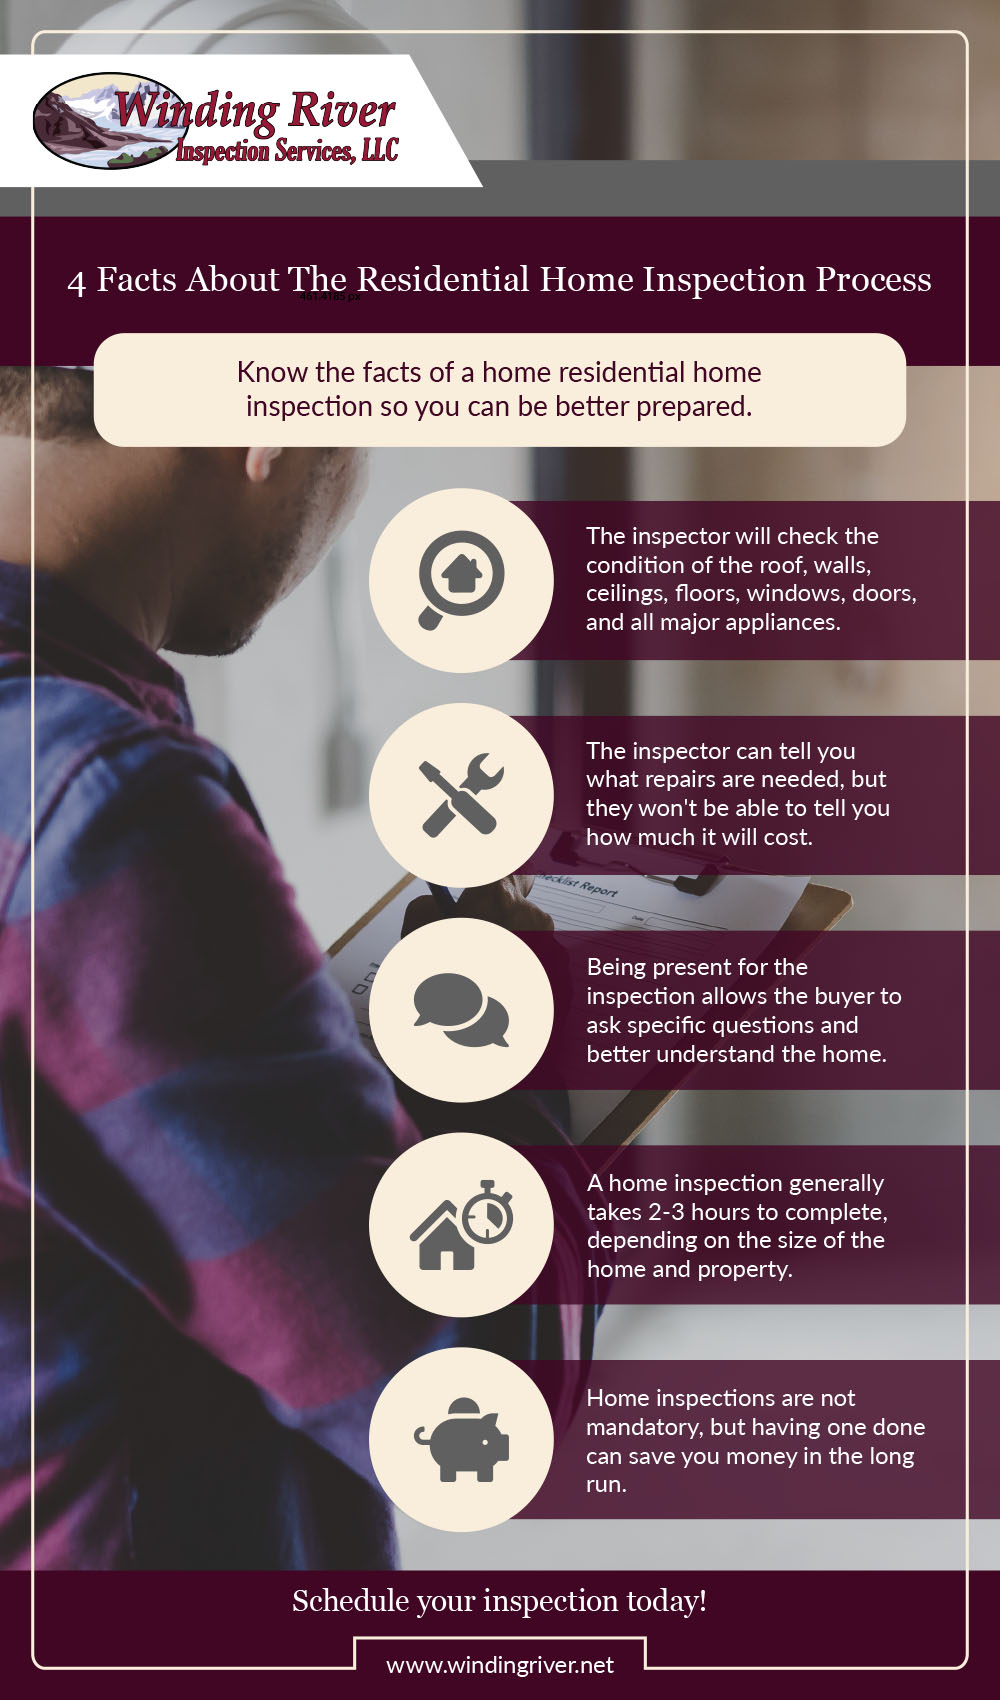 4 Facts About The Residential Home Inspection Process Infographic